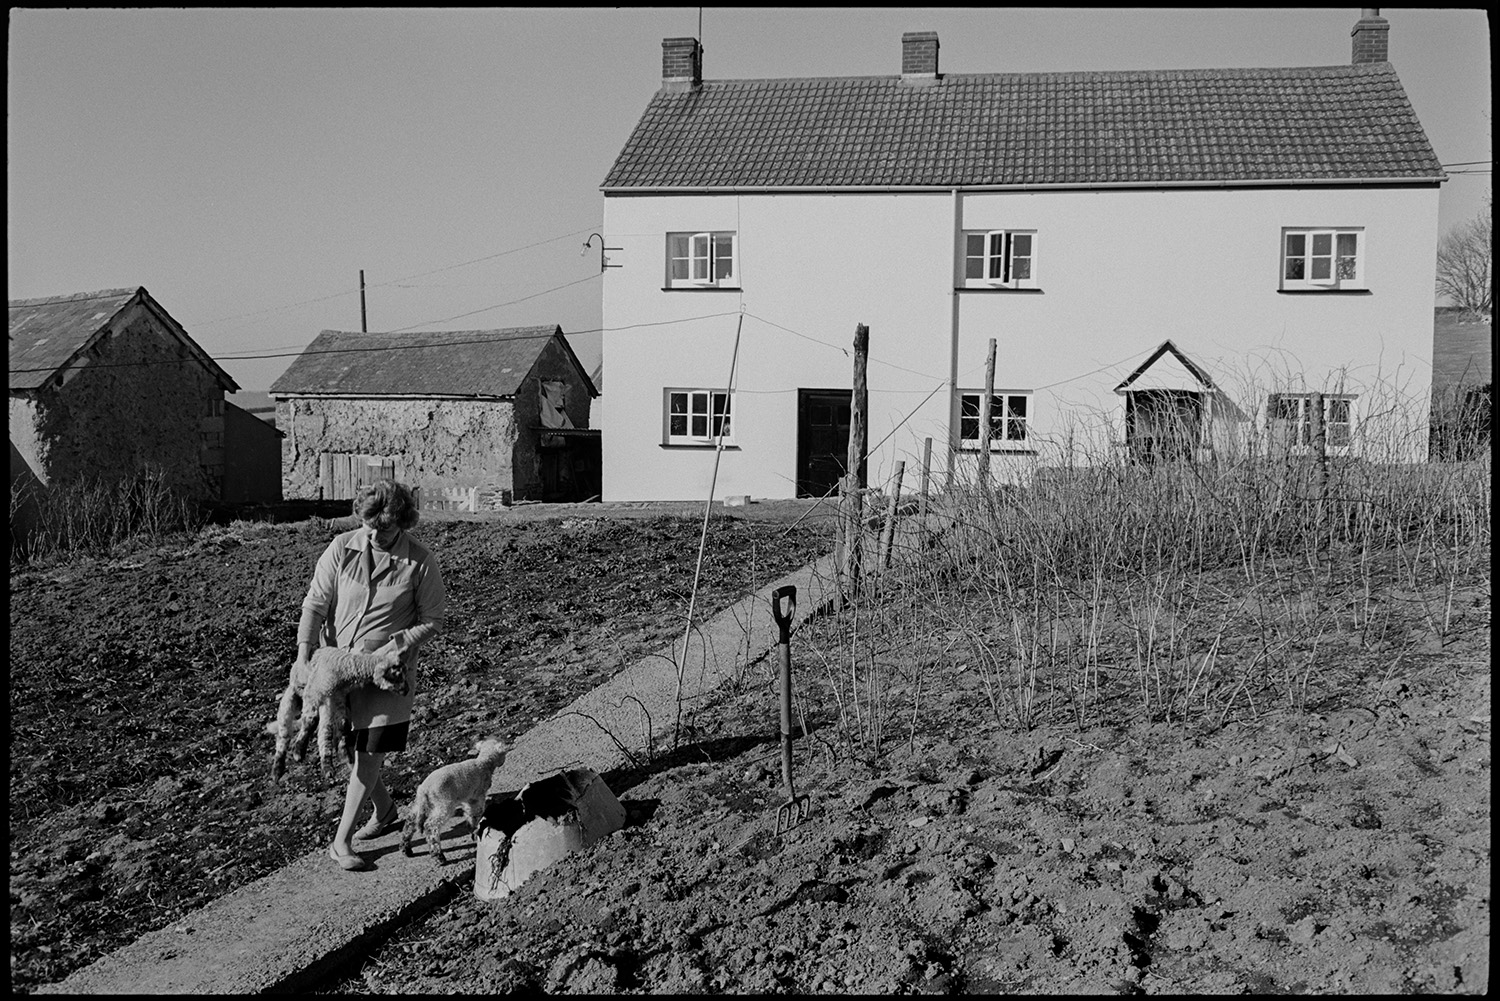 Farmhouse with sheep, farmers wife with lambs in garden. 
[Mrs Bourne carrying a lamb along a garden path at Jeffrys, Beaford, also known as Mill Road Farm. Another lamb is following her. The farmhouse can be seen in the background and a fork is in the garden next to the path.]